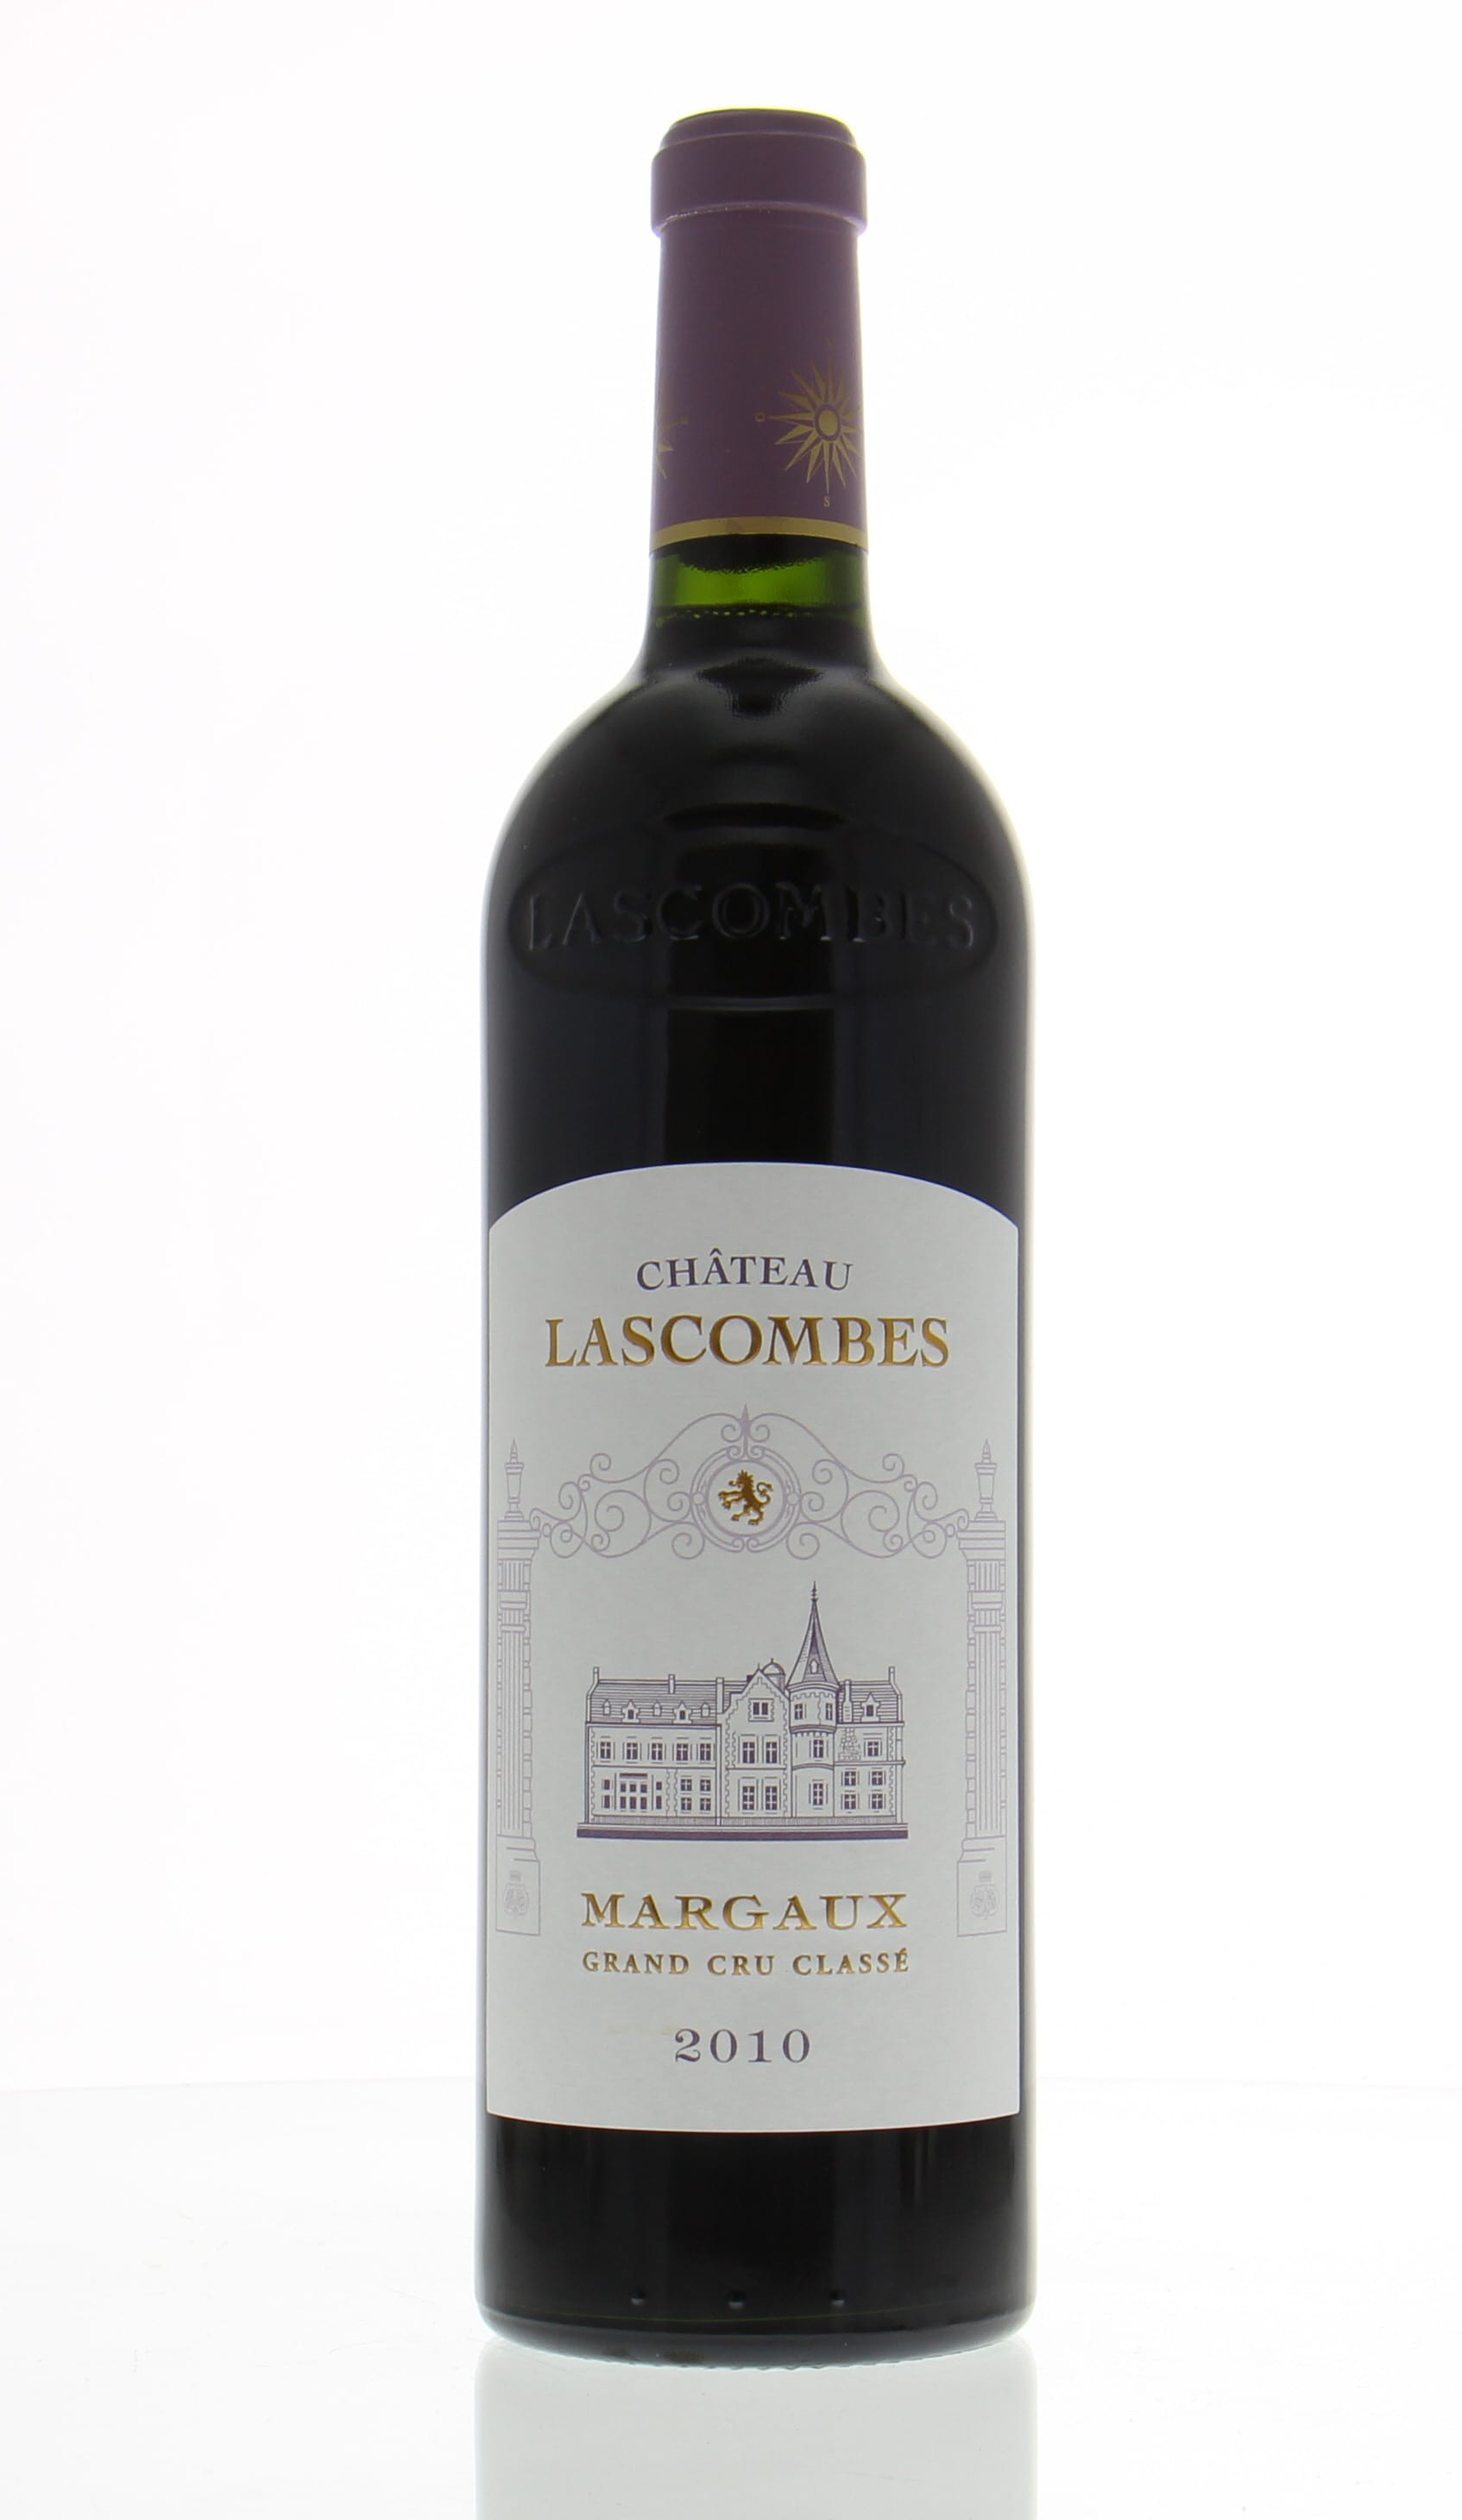 Chateau Lascombes - Chateau Lascombes 2010 From Original Wooden Case